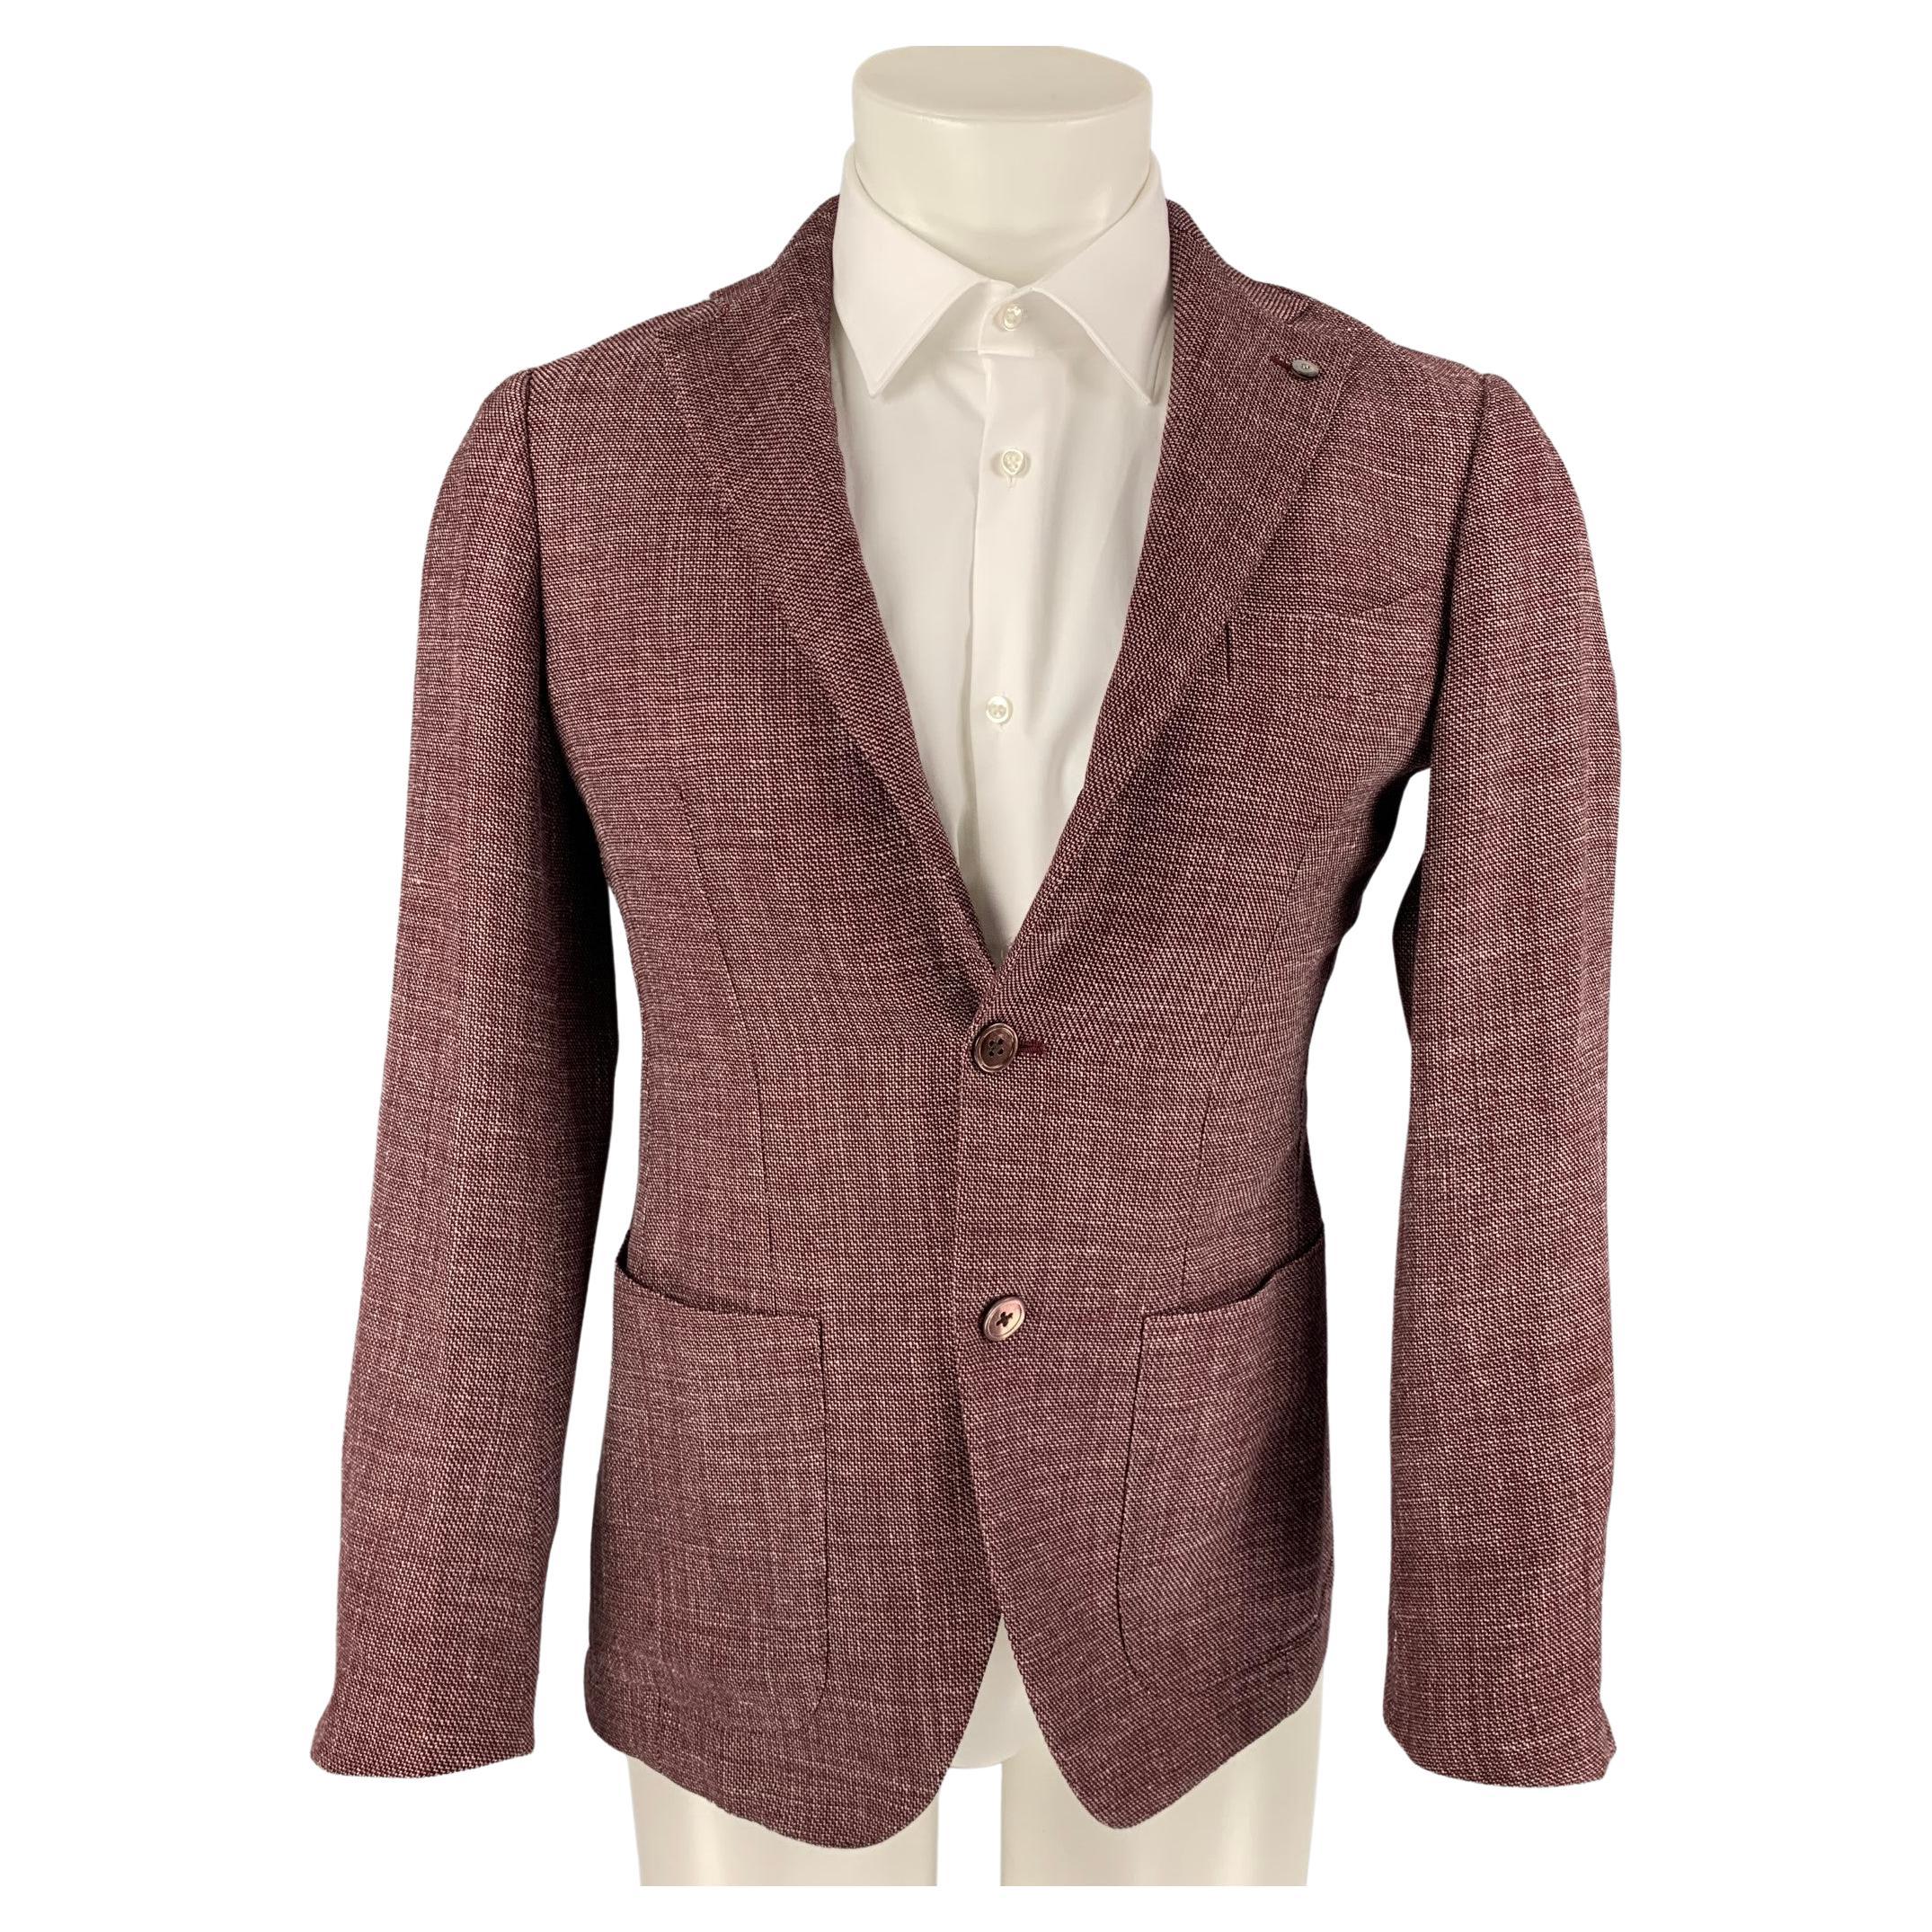 BRILLA Size 34 Burgundy & Pink Woven Single Breasted Sport Coat